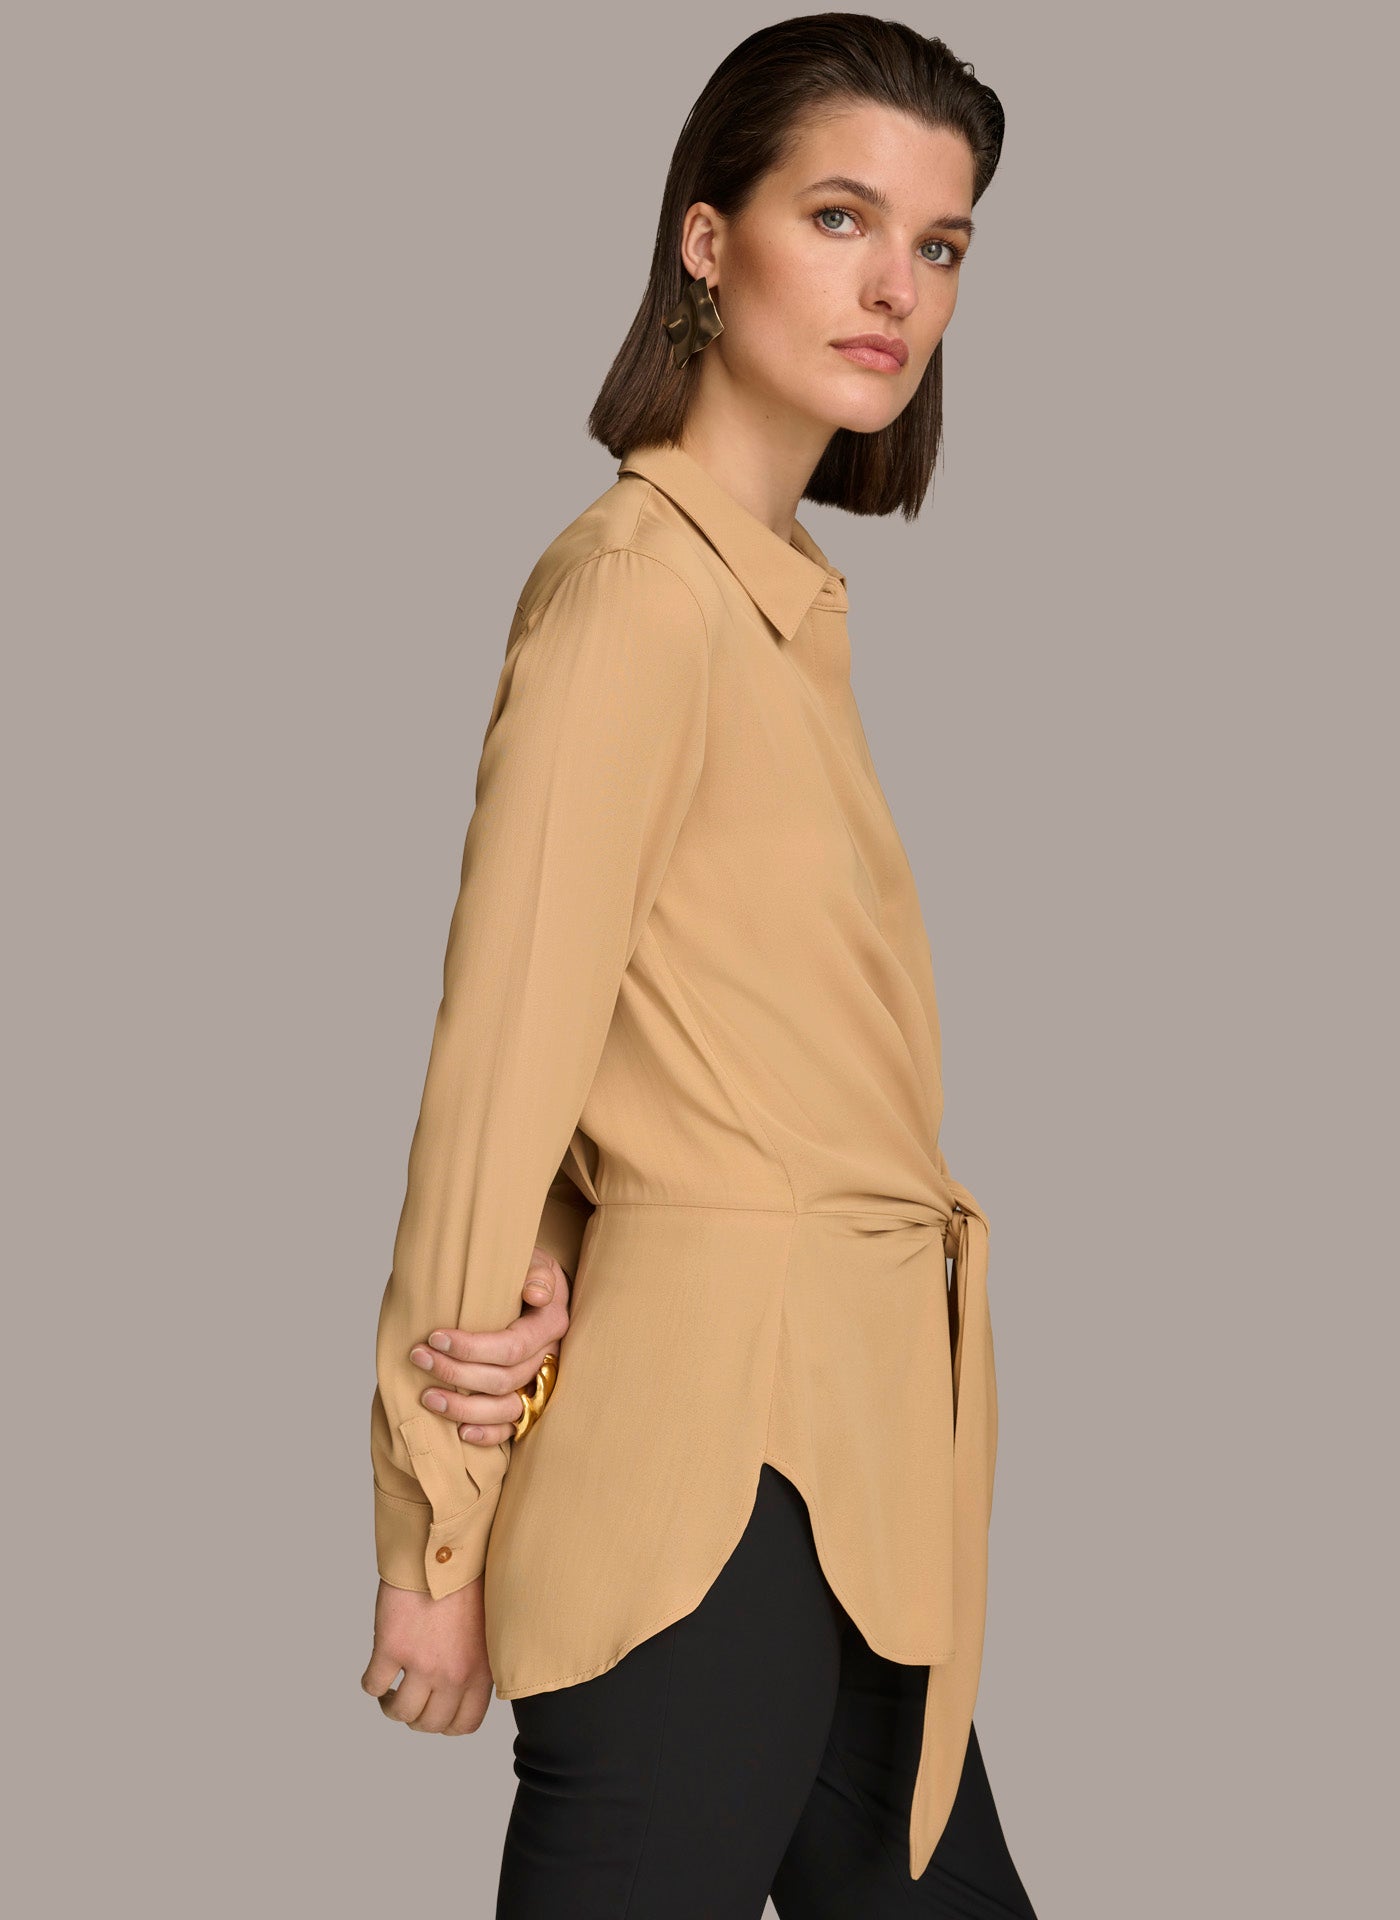 LONG SLEEVE HIGH-LOW WITH TIE AT WAIST